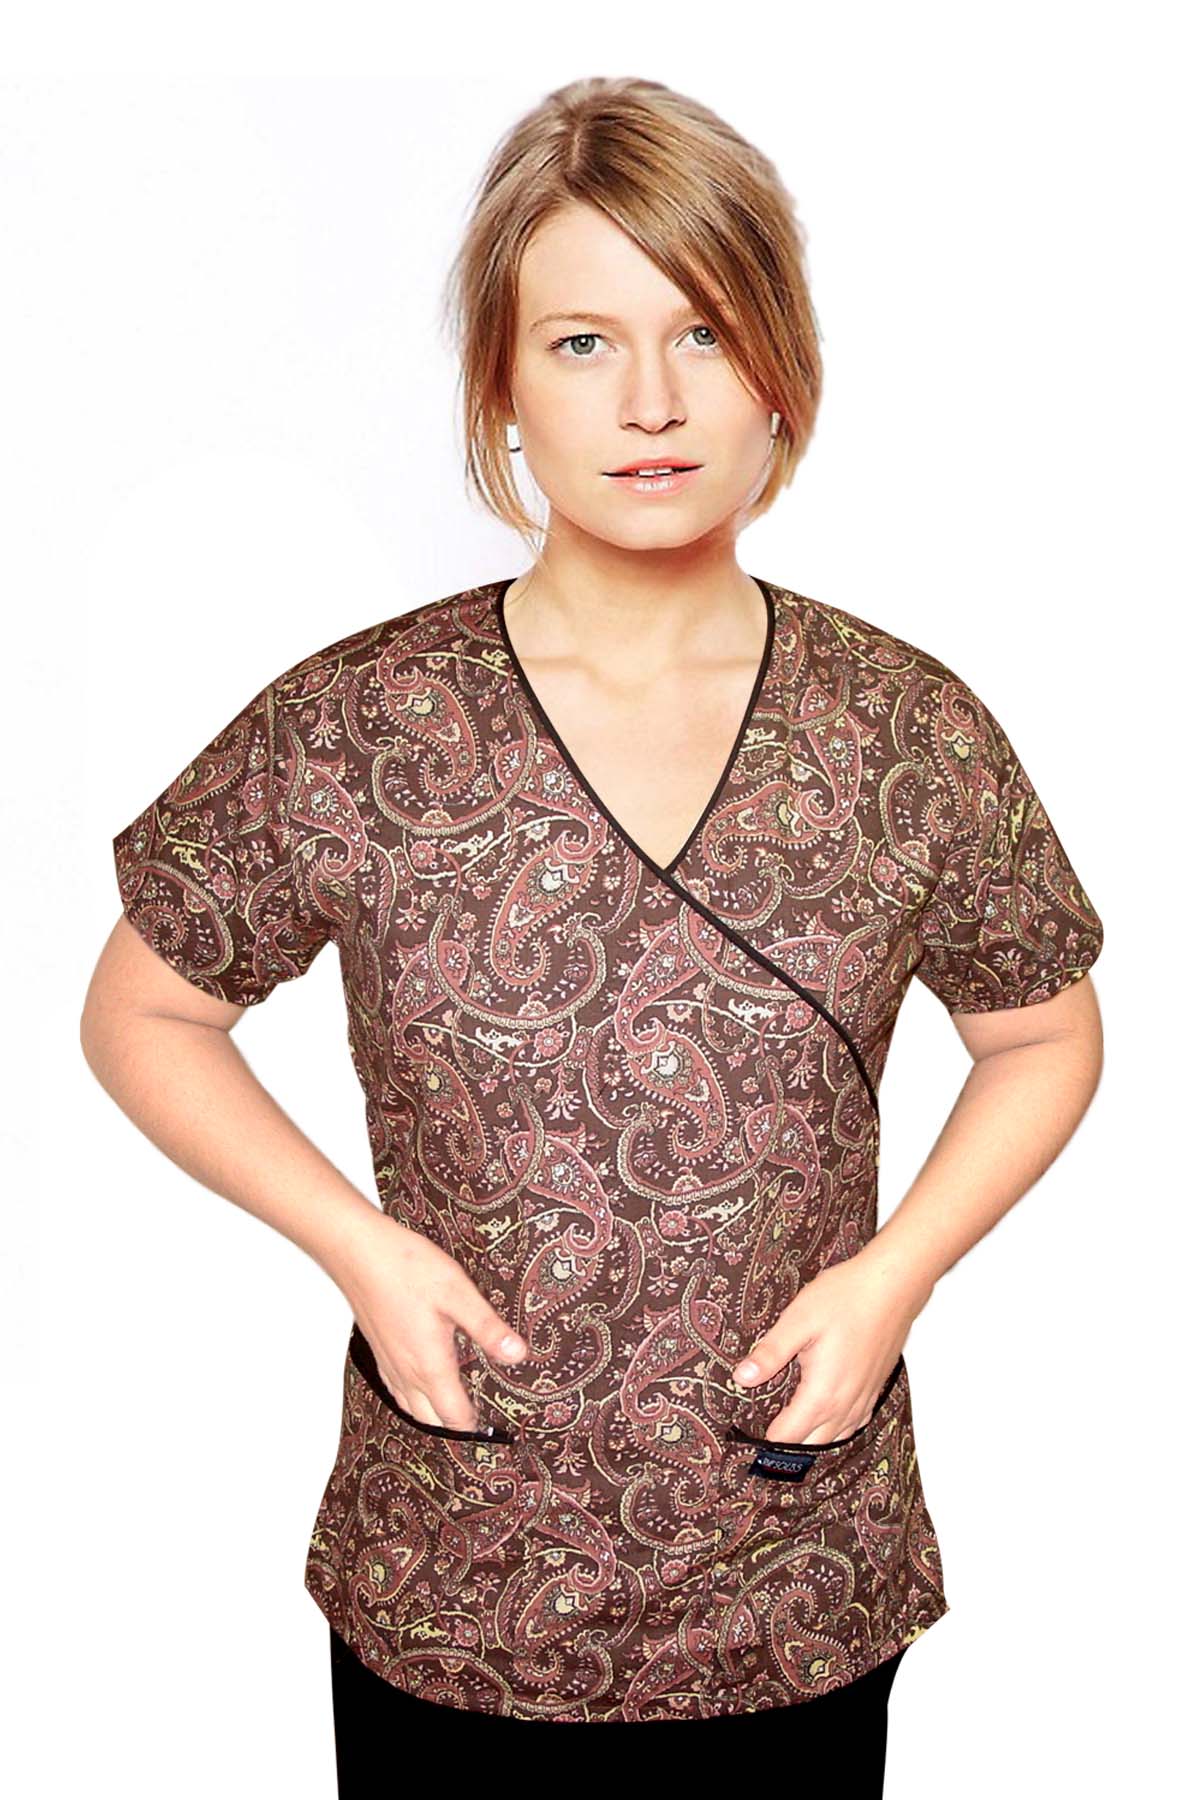 Printed scrub set mock wrap 5 pocket half sleeve in brown daisy with black (top 3 pocket with bottom 2 pocket boot cut) brown daisy print